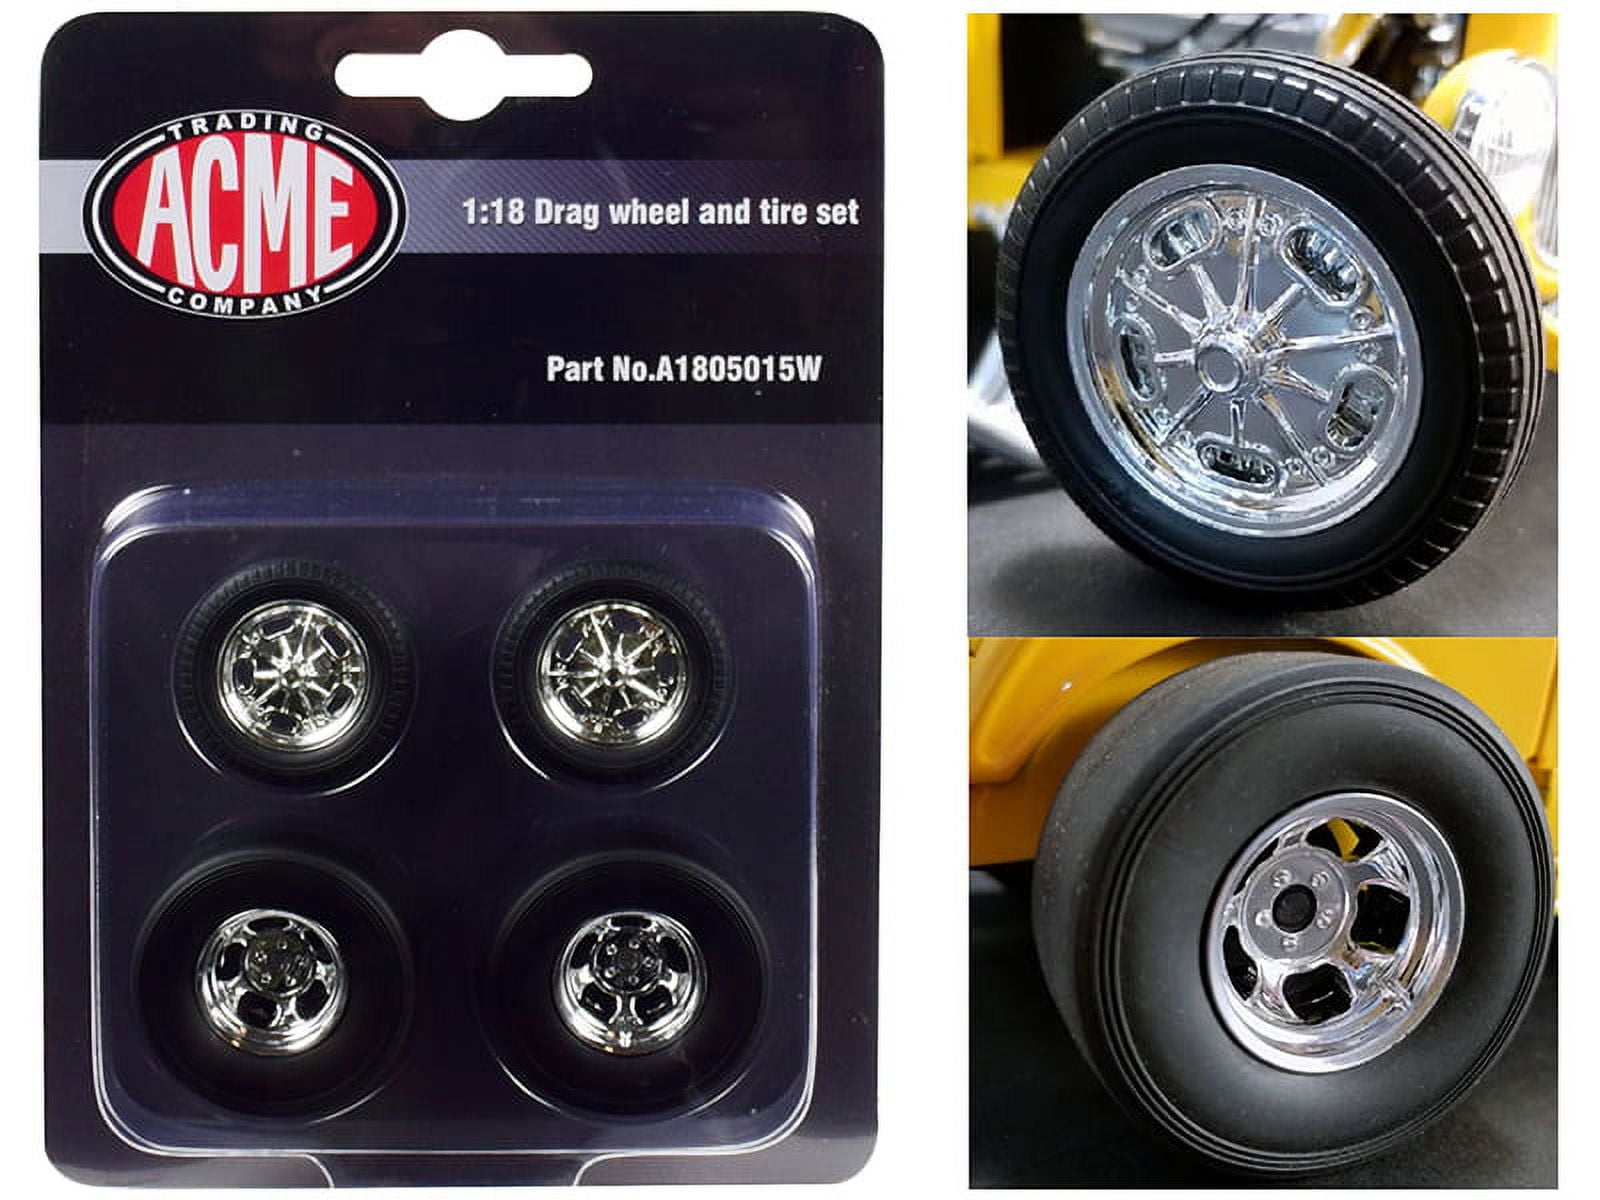 Picture of ACME A1805015W 1 by 18 Scale Chrome Drag Wheel & Tire Set for 1932 Ford 3 Window Model - 4 Piece